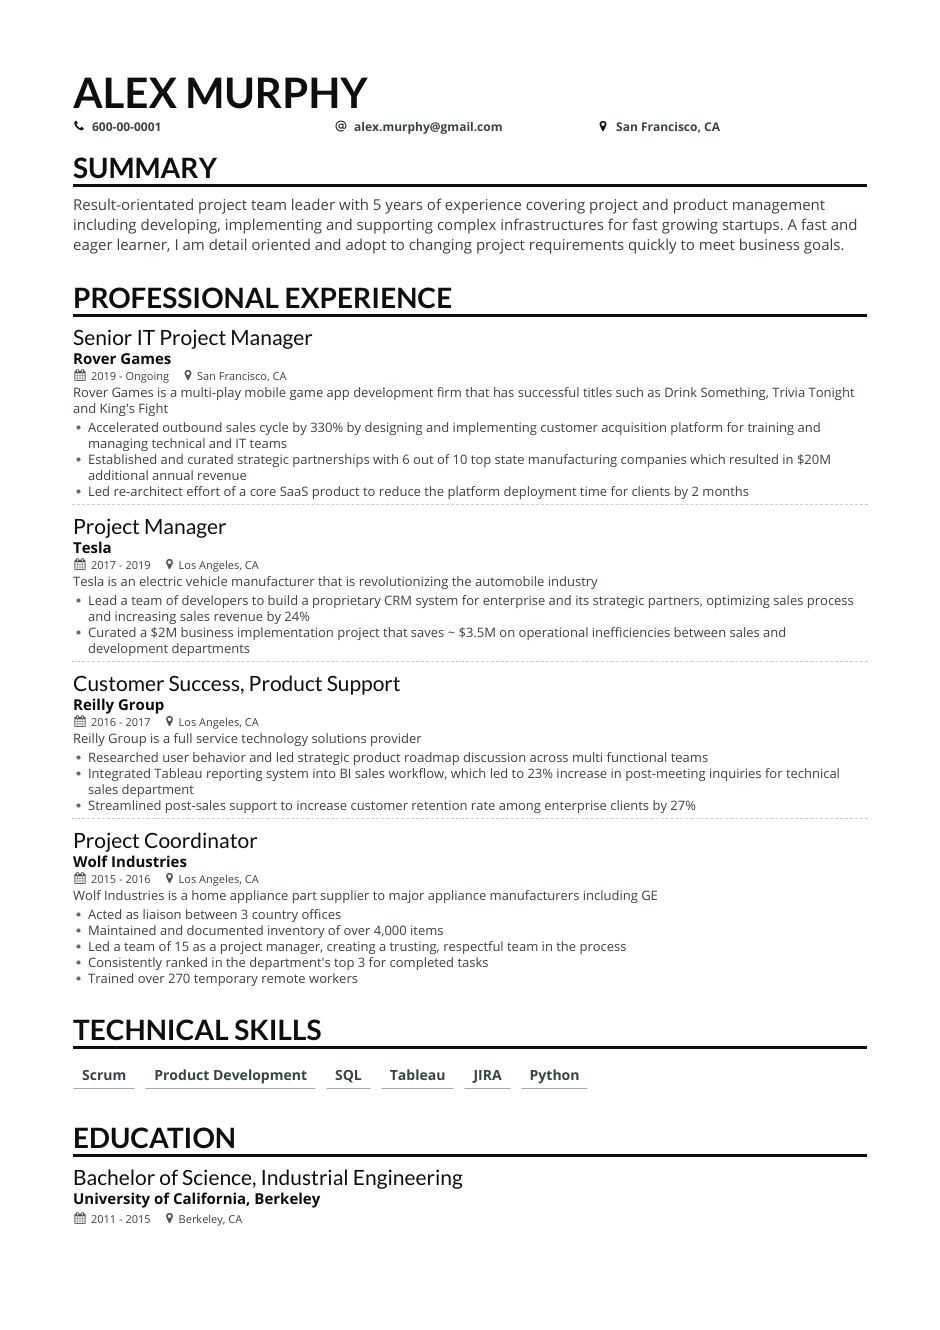 Sample Resume for Project Manager Position 4 Job-winning Project Manager Resume Examples In 2021